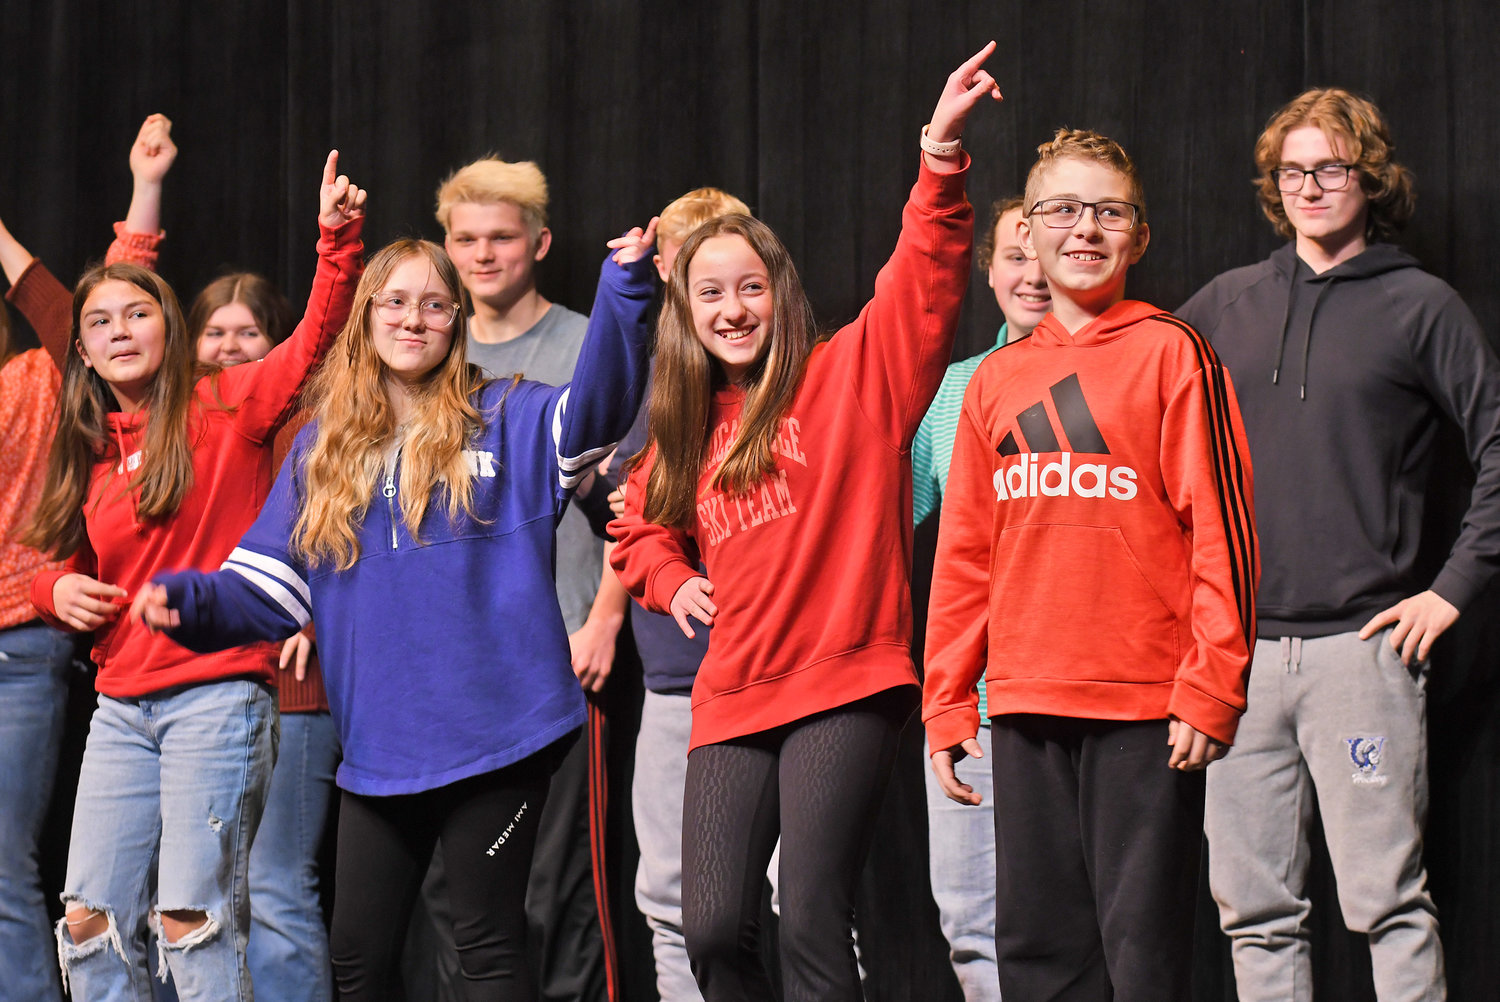 Holland Patent students perform "Morning Exercise Dance" Friday, Feb. 3 in the Clinton Middle School auditorium as part of the Chinese New Year celebration.